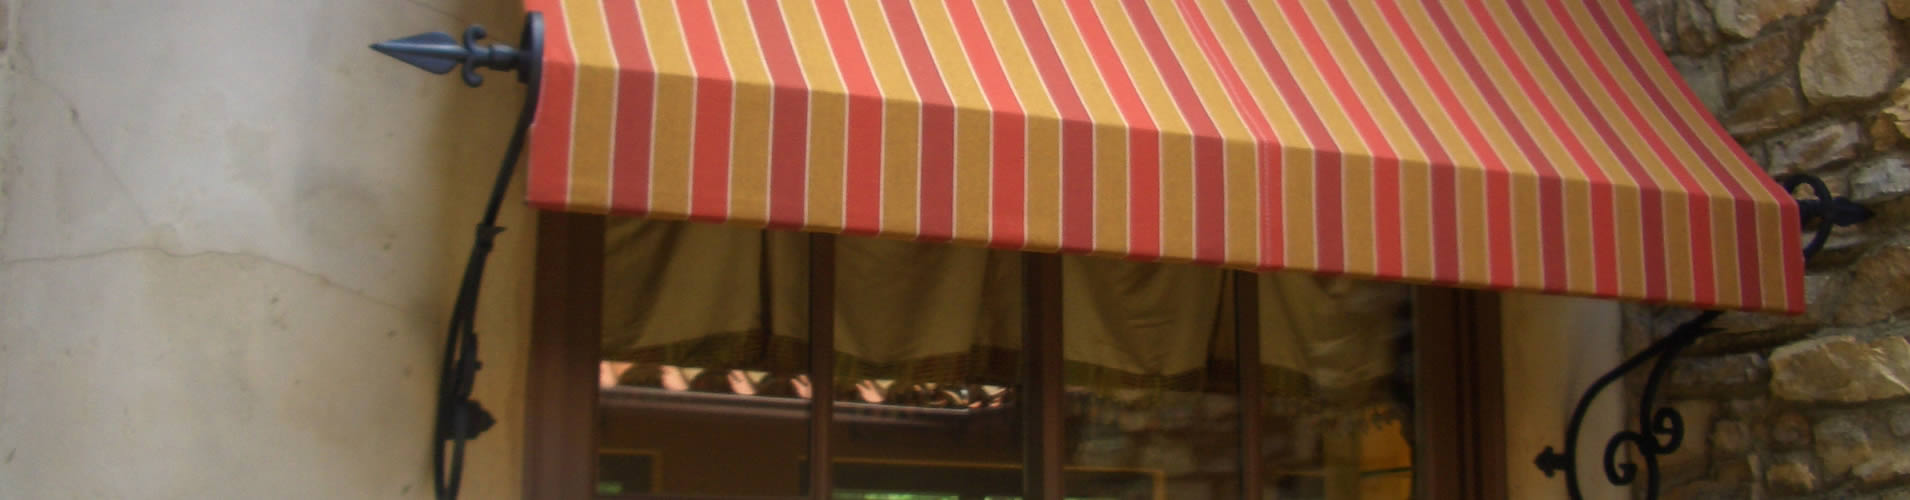 Fort Lauderdale awning repair services company